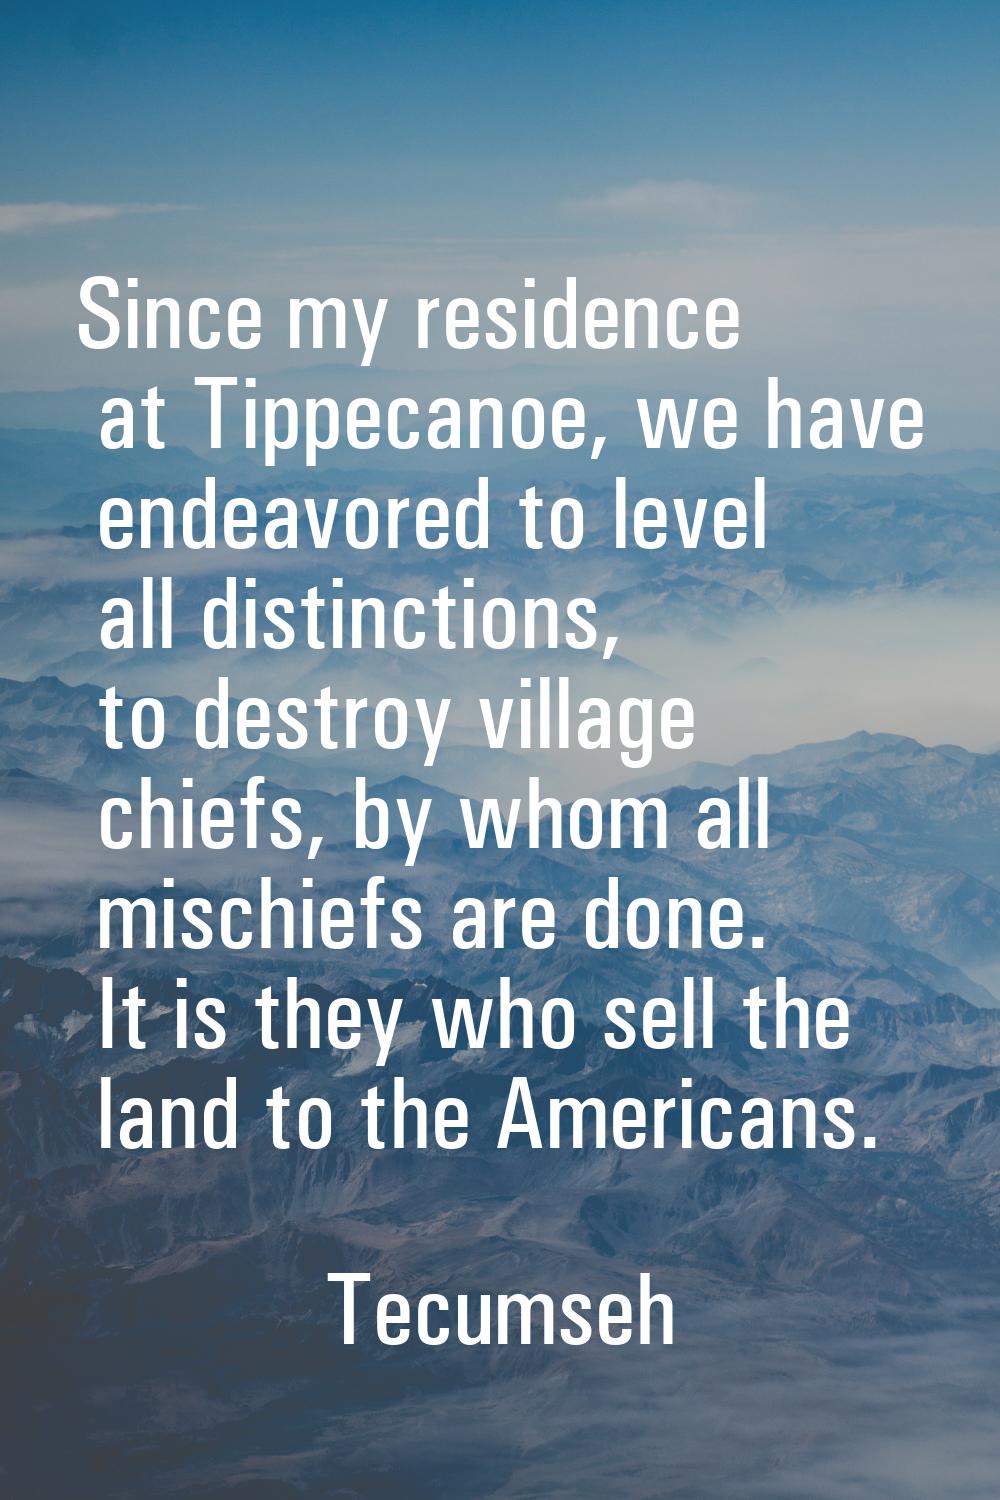 Since my residence at Tippecanoe, we have endeavored to level all distinctions, to destroy village 